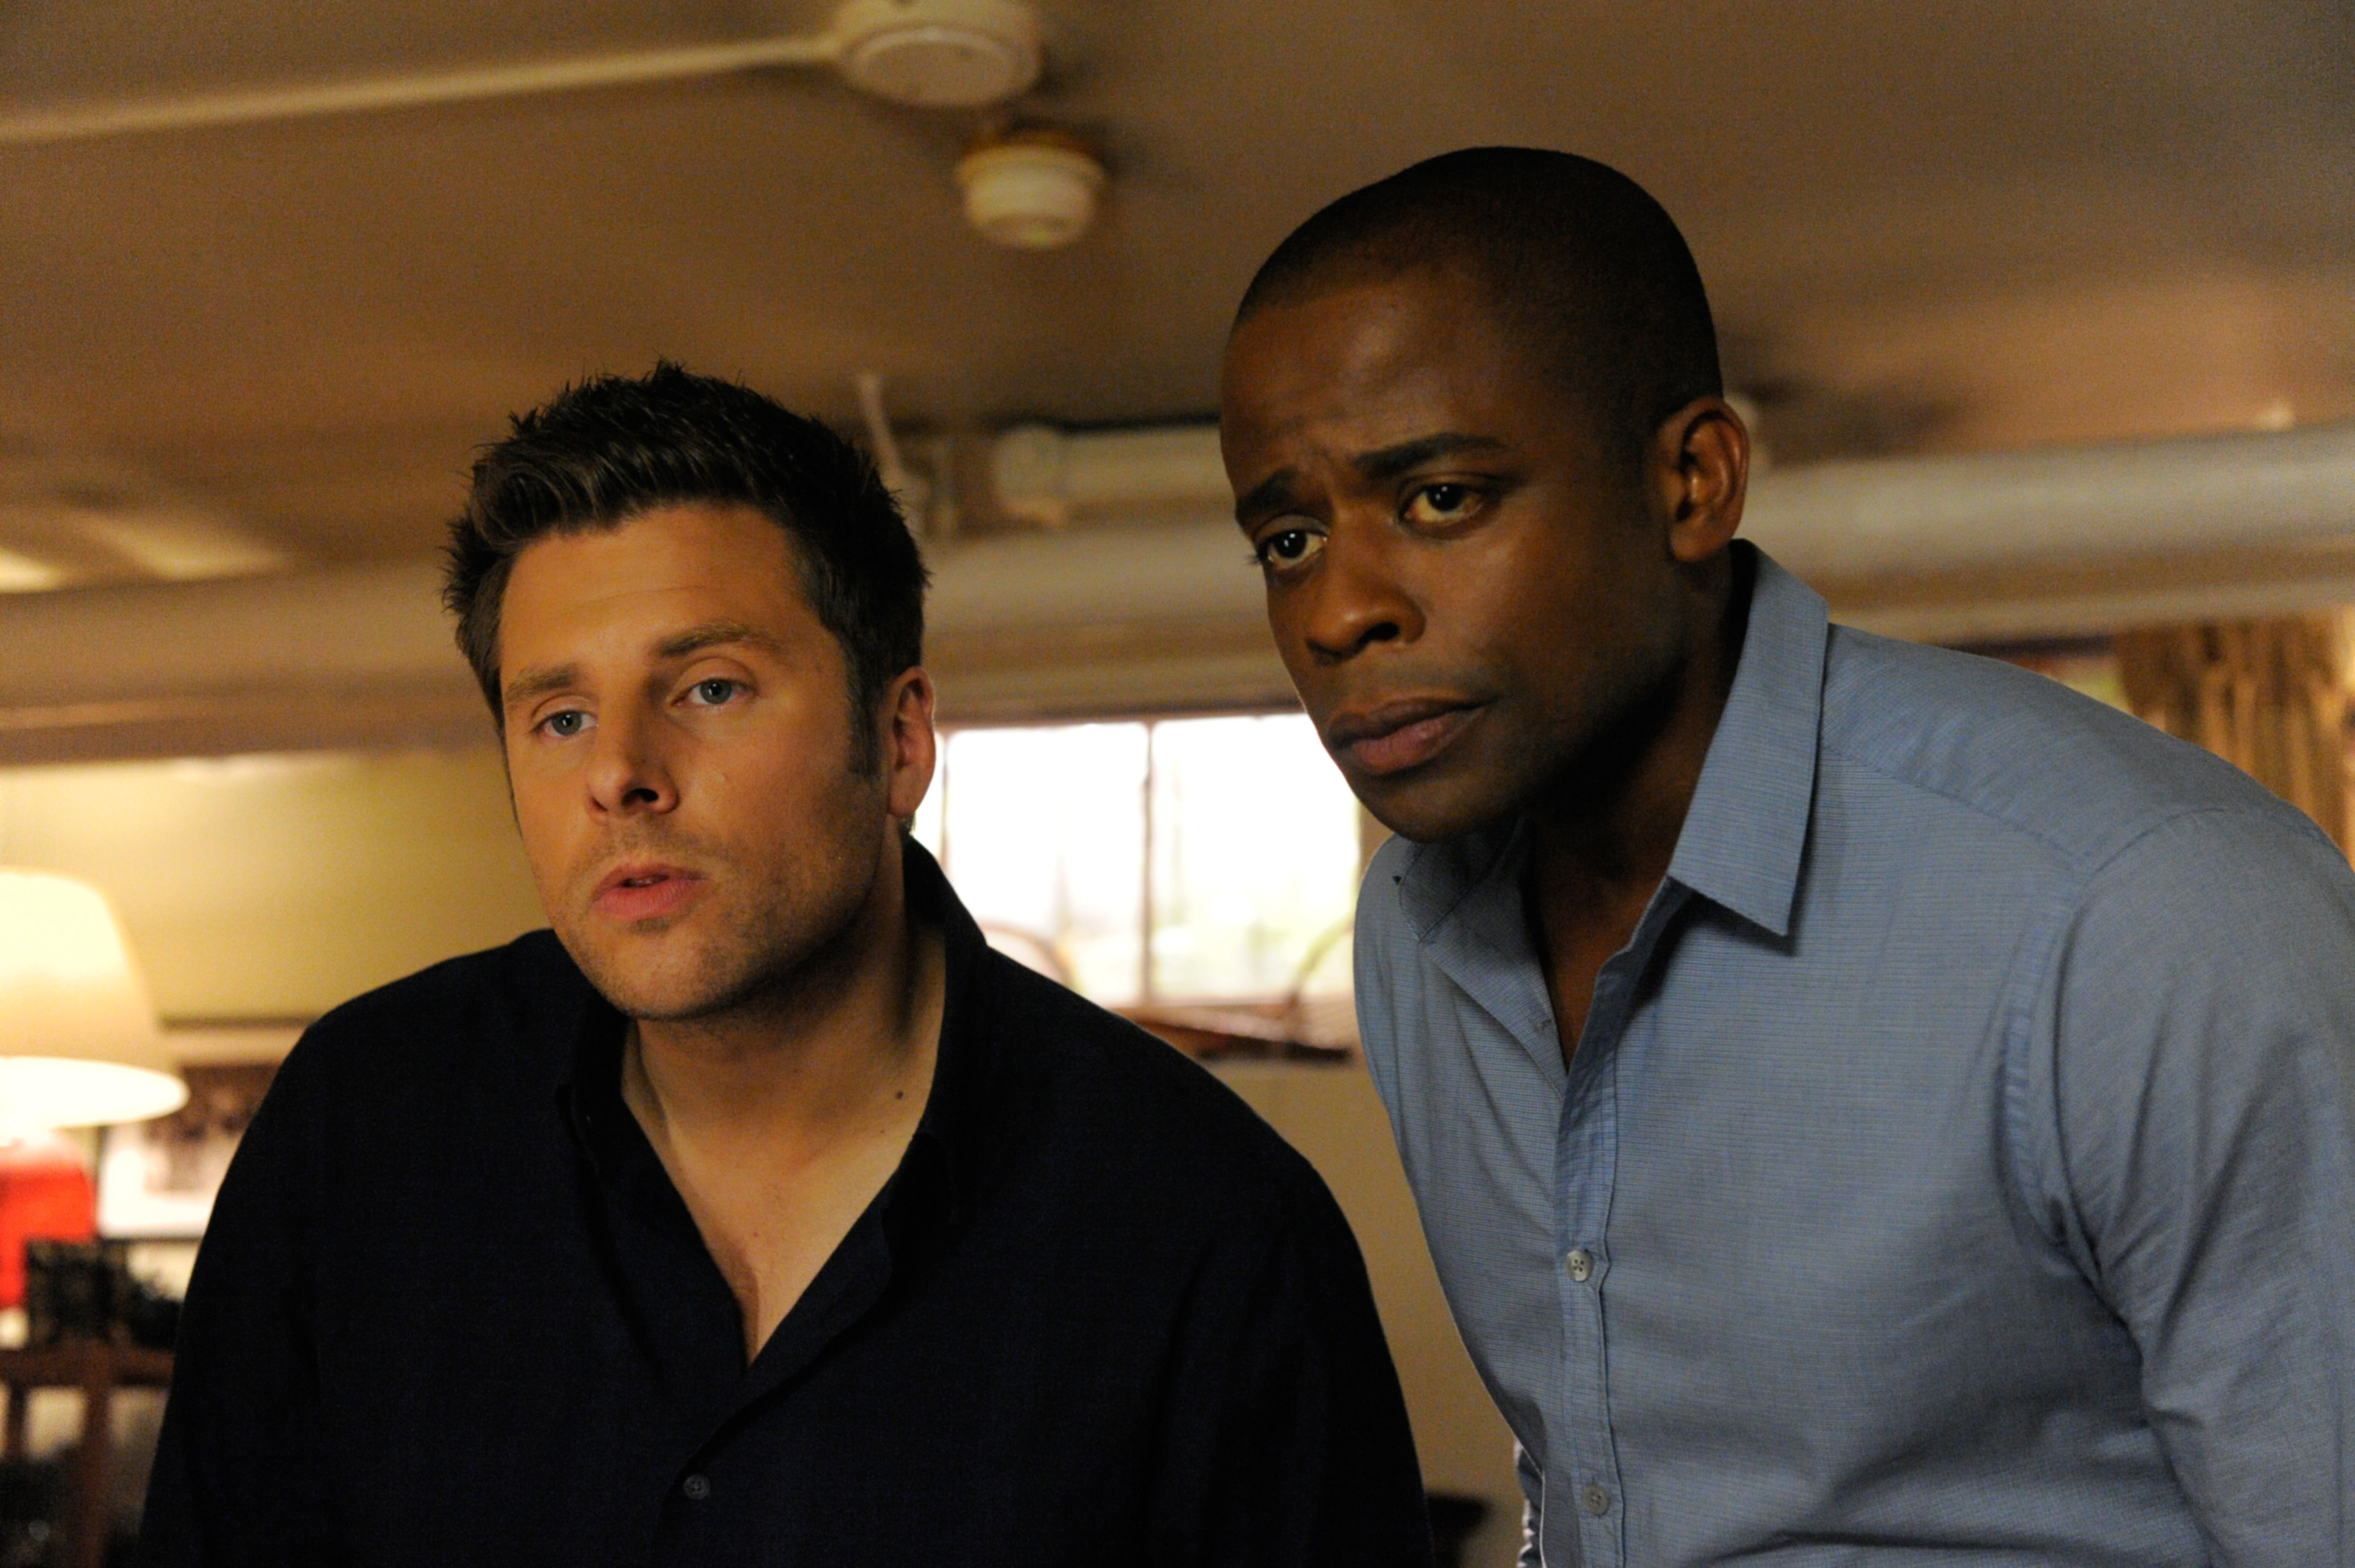 Two actors portraying Shawn and Gus from the TV show &quot;Psych&quot; look off-screen with concerned expressions